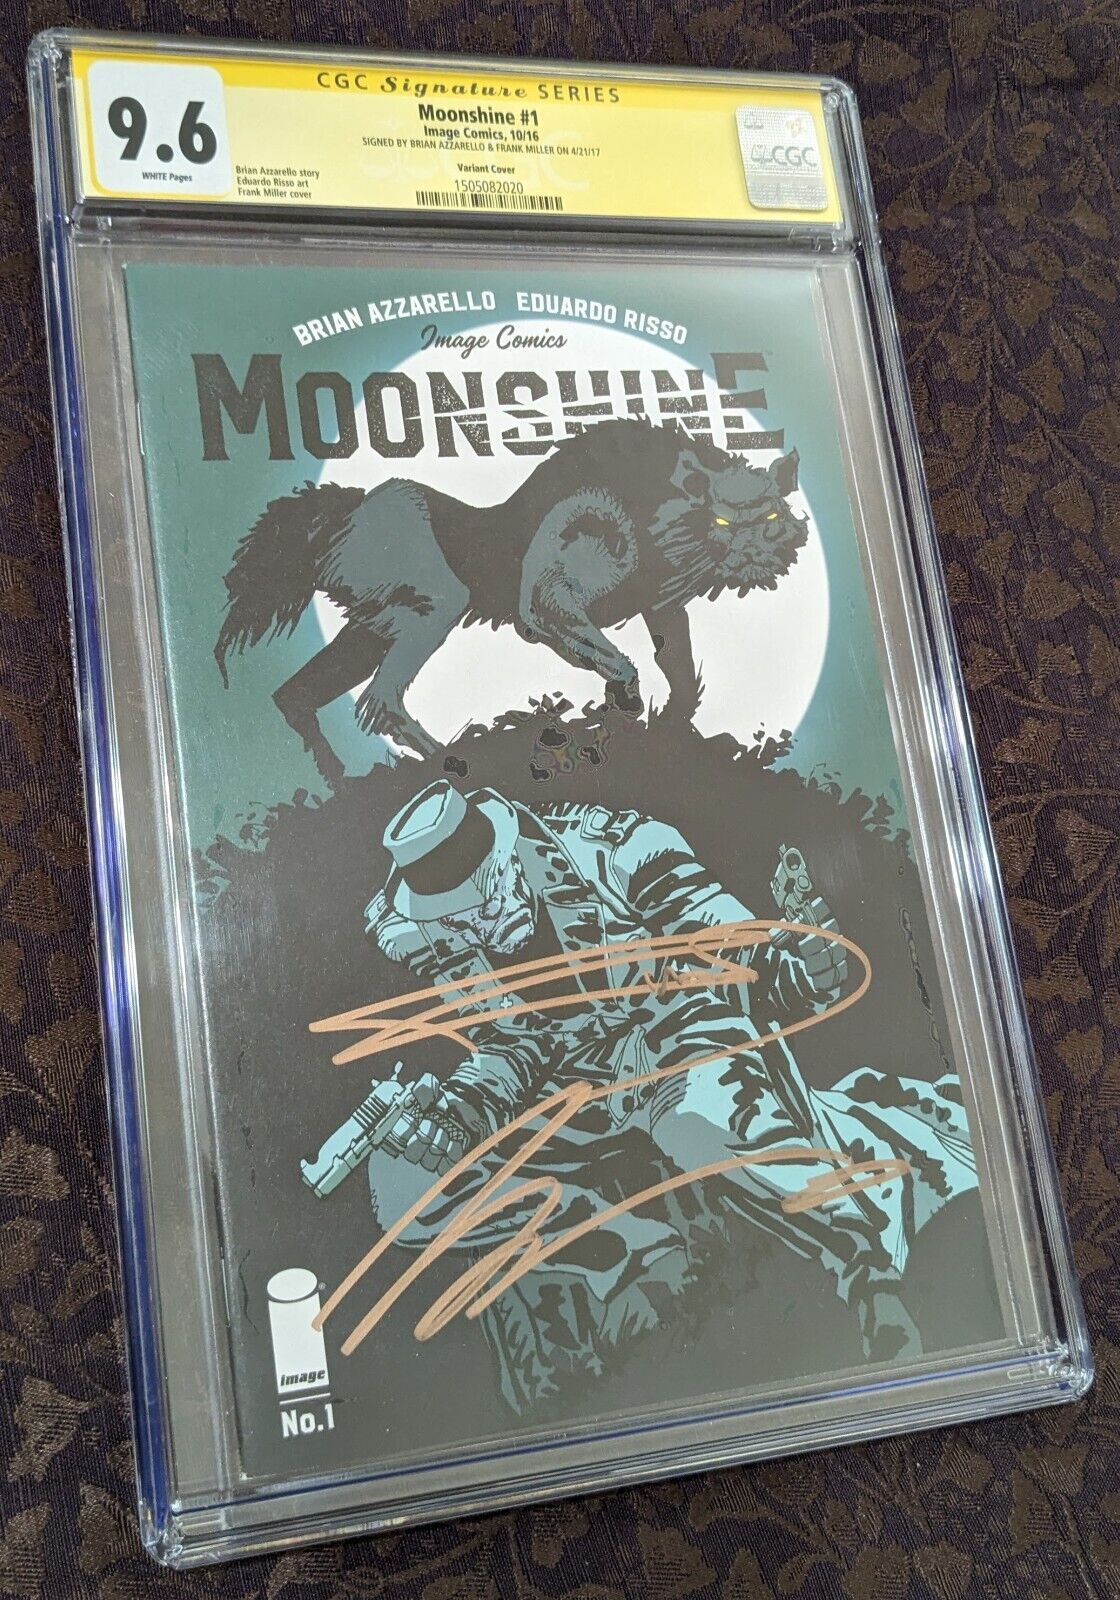 Moonshine #1 CGC 9.6 Signature Series - Signed By Frank Miller &Brian Azzarello